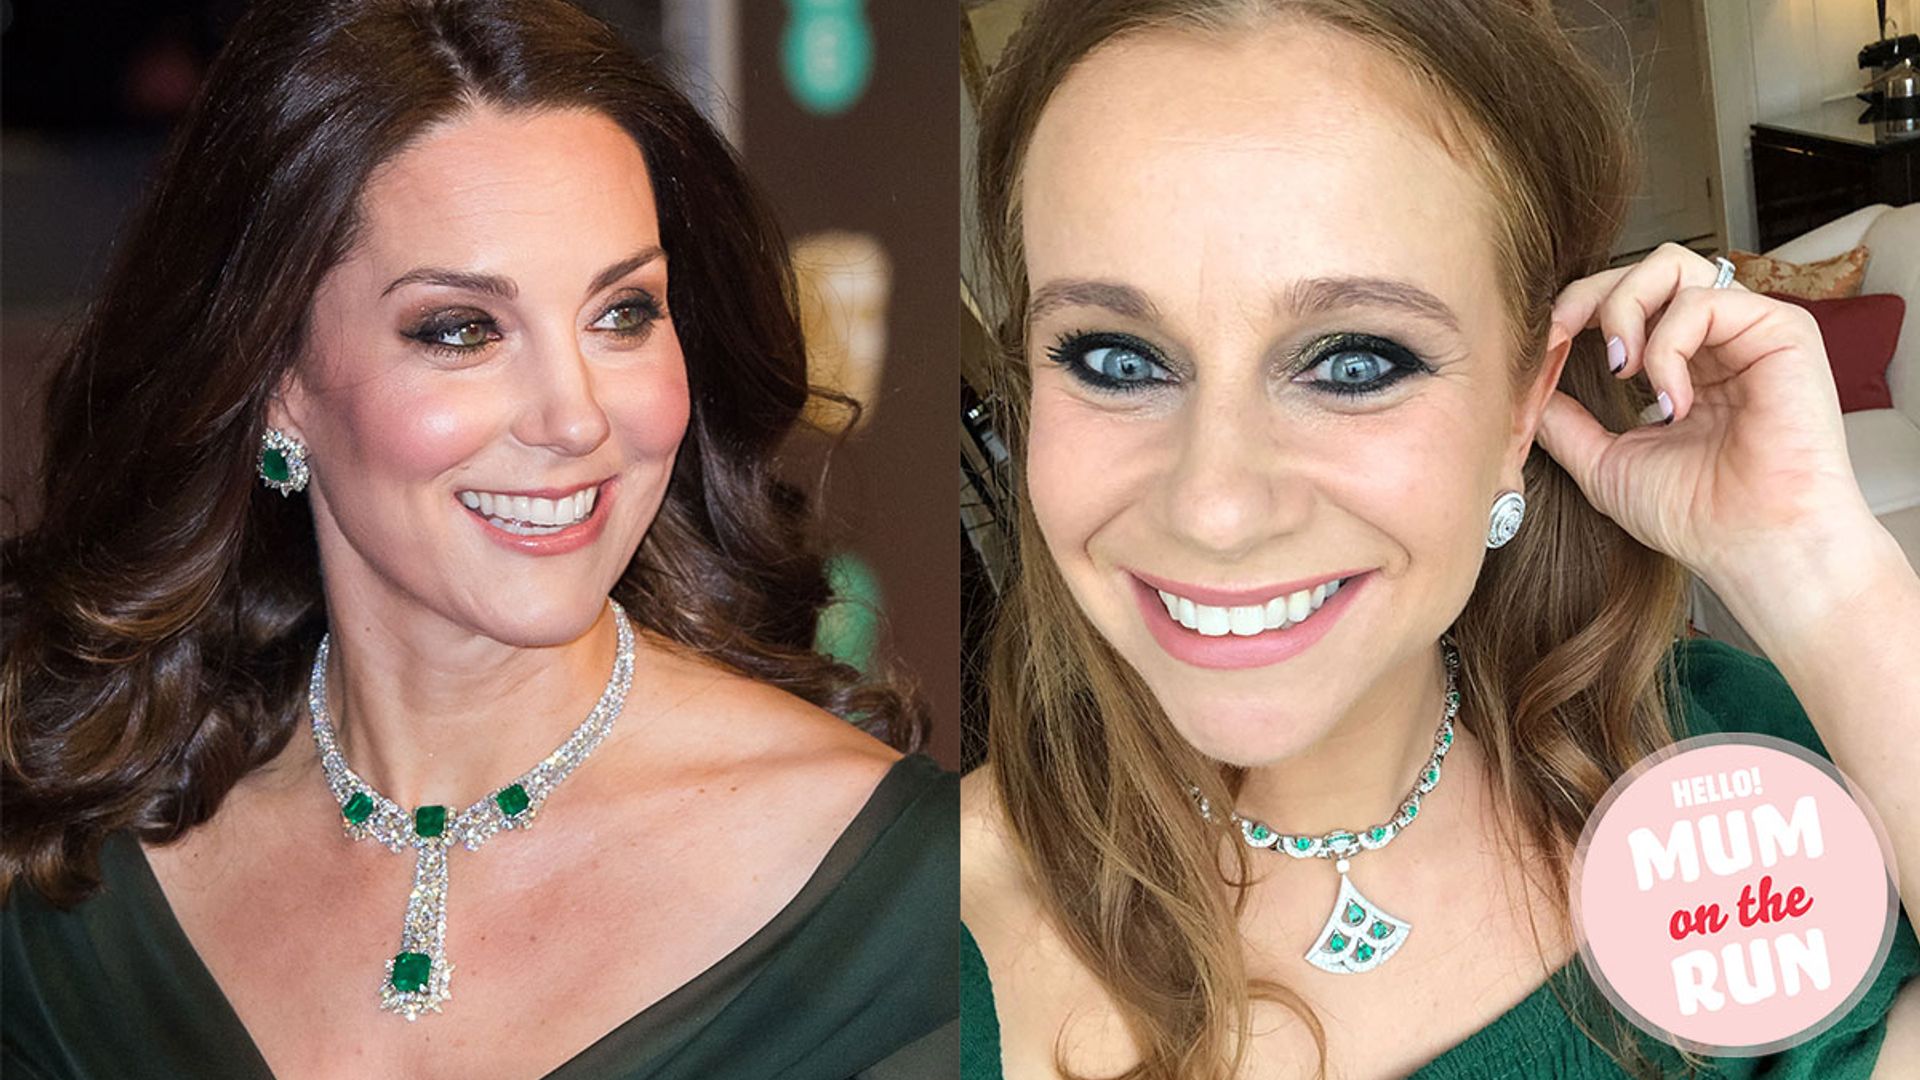 We tried Kate Middleton’s secret smokey eye makeup – watch our step-by-step video